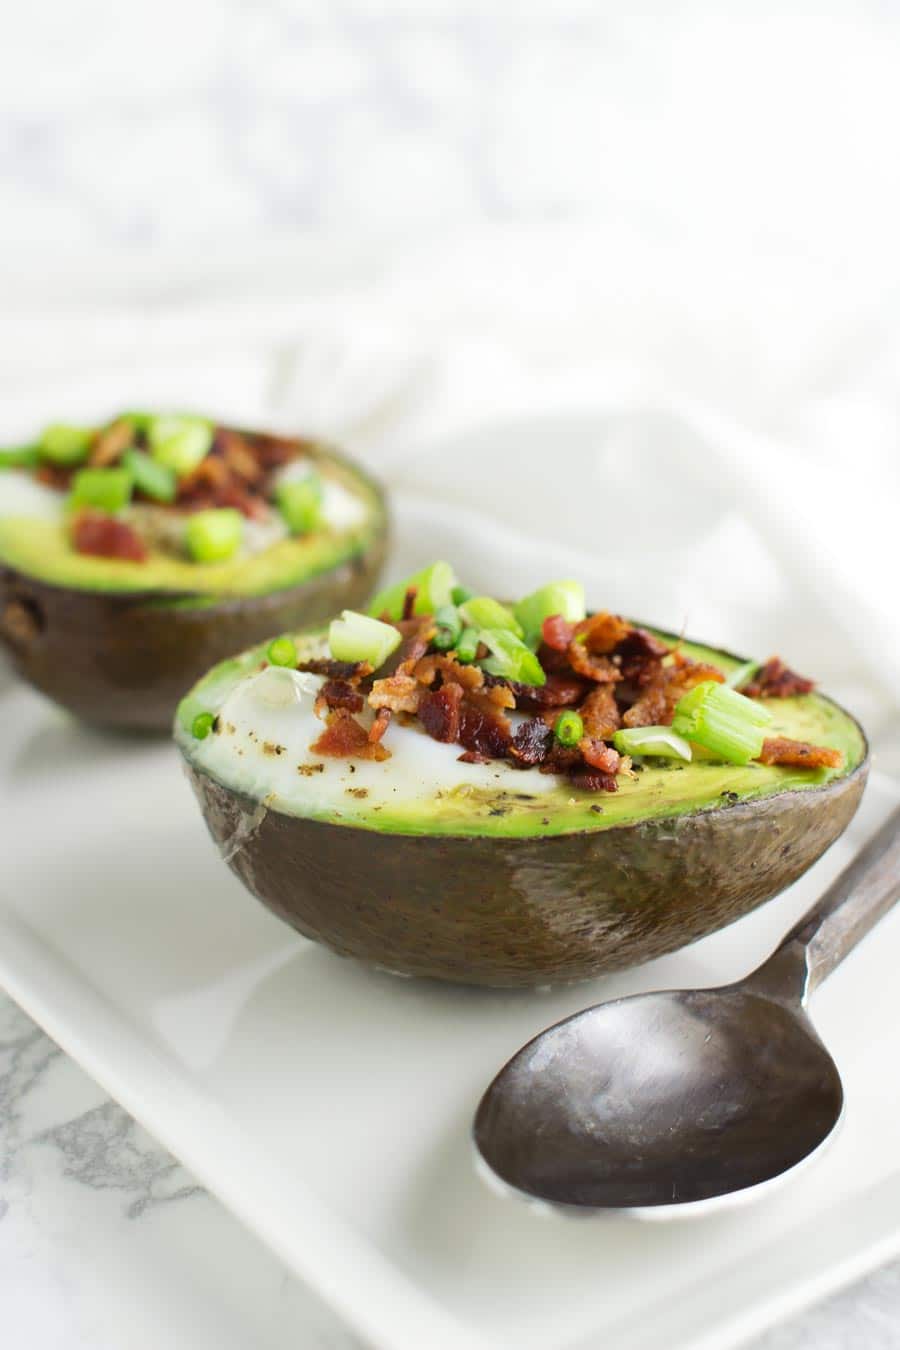 Baked Eggs in Avocados recipe from acleanplate.com #paleo #grainfree #glutenfree